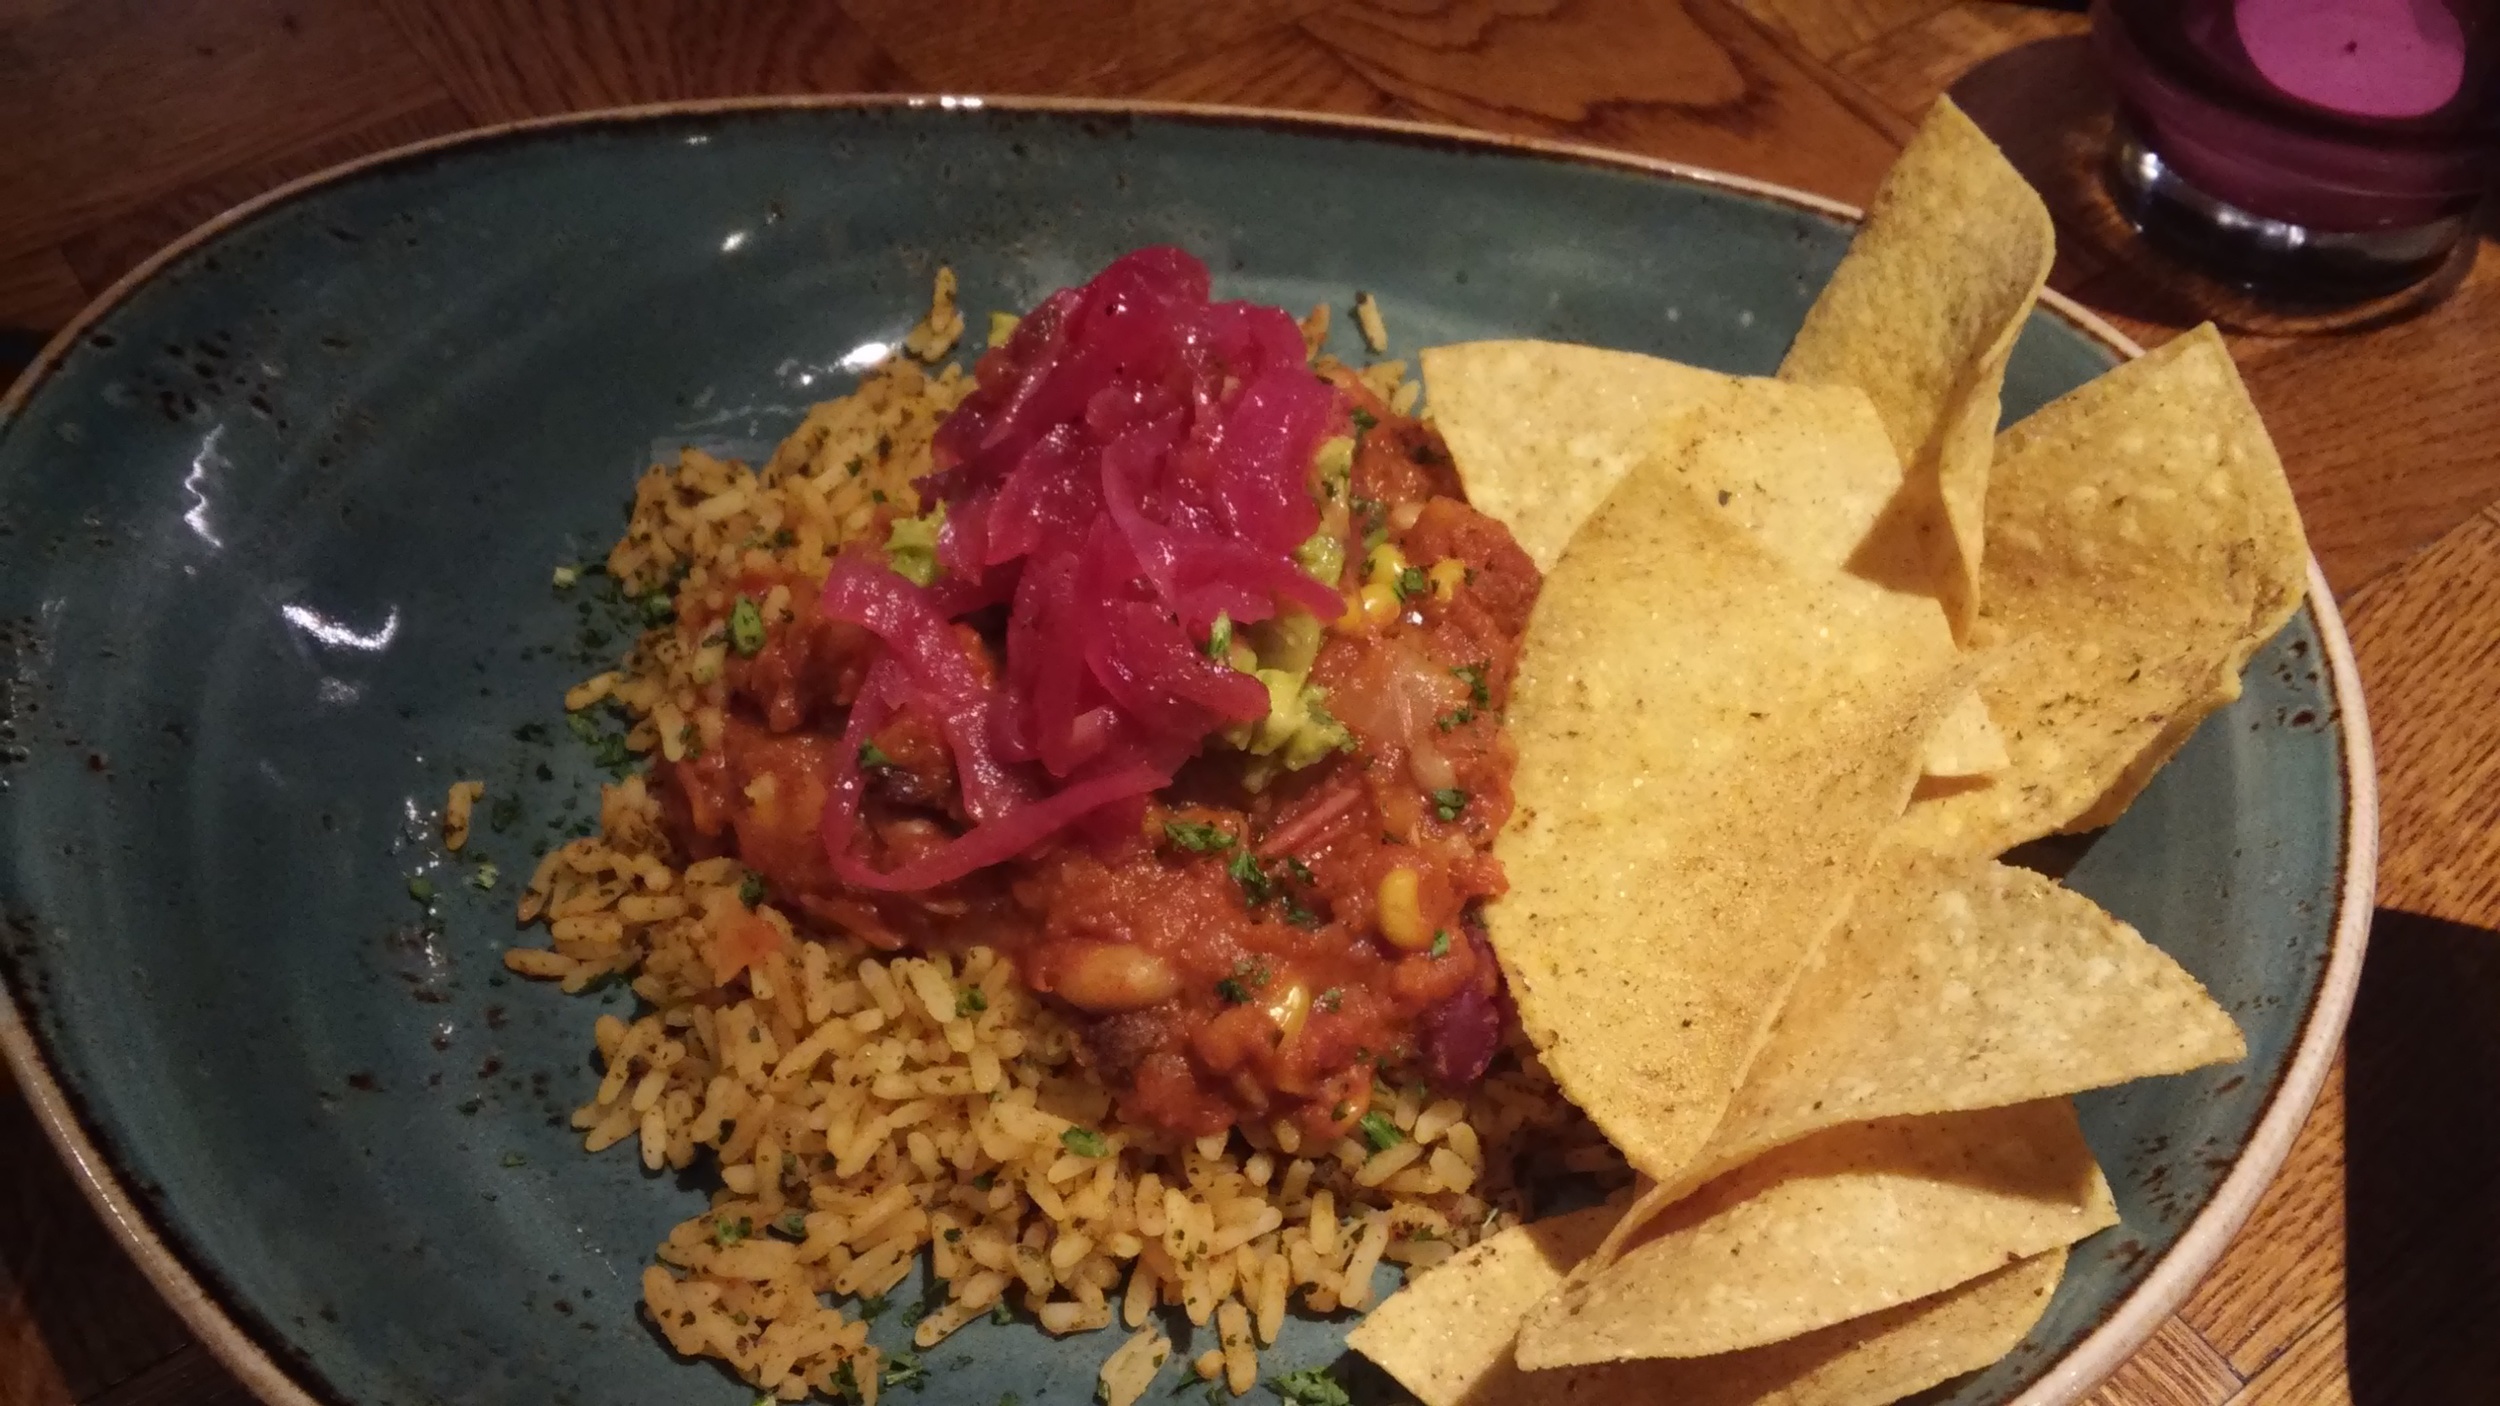 Veggie five bean chilli served with Mexican spiced rice, roasted vegetables and tortilla chips